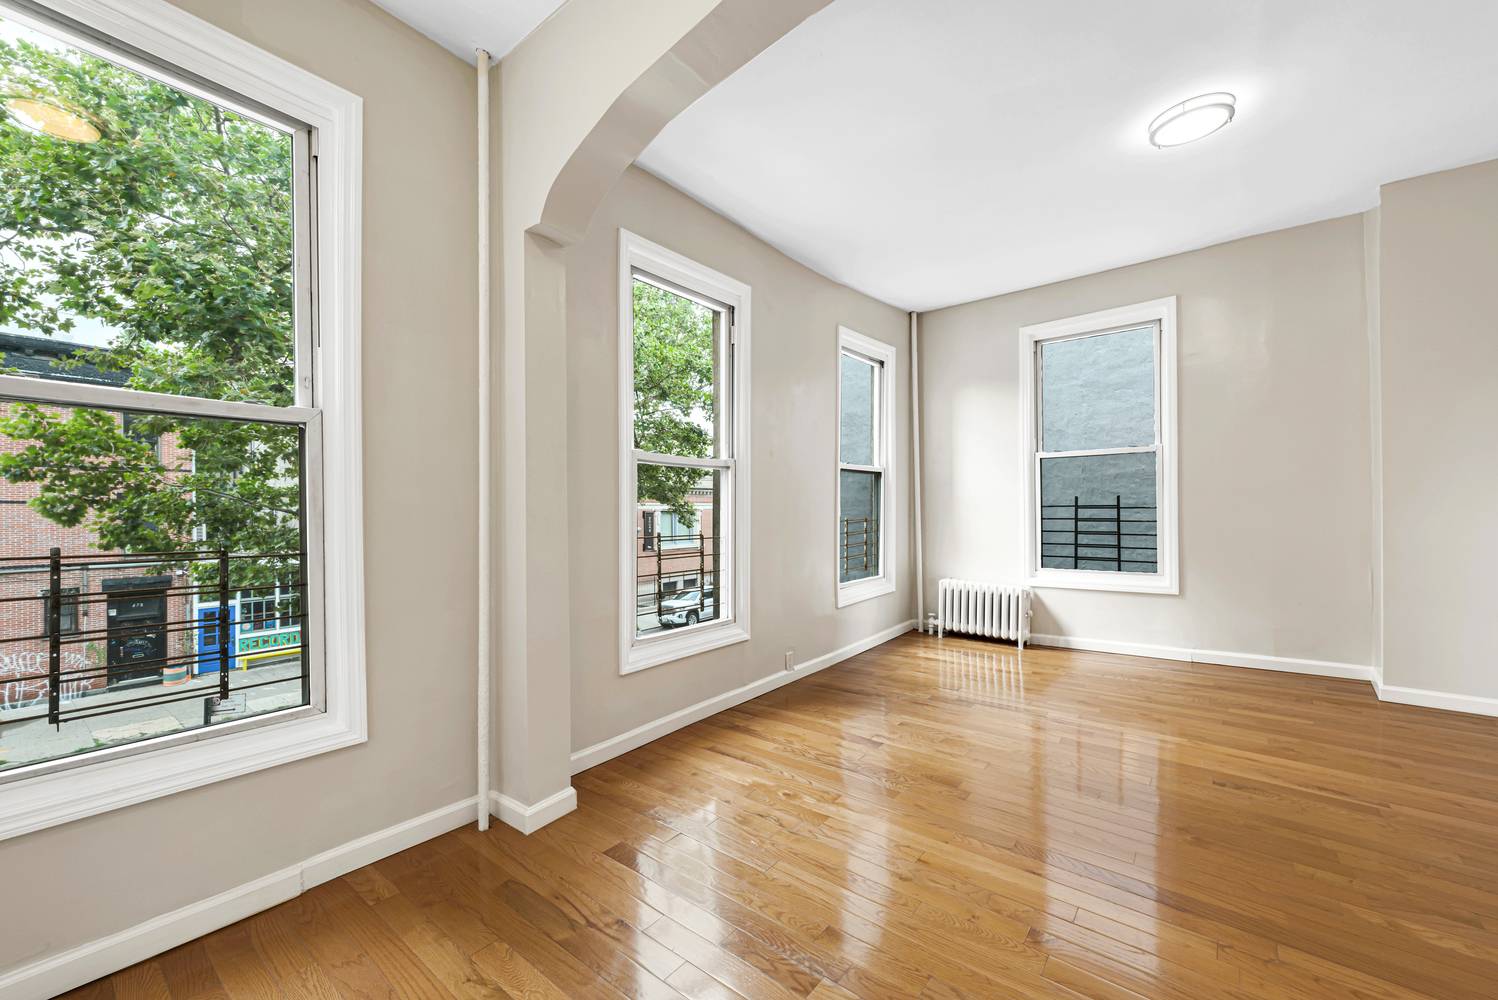 No Brokers Fee ! ! This spacious, well maintained two bedroom one bath apartment is located in the heart of historic Stuyvesant Heights !